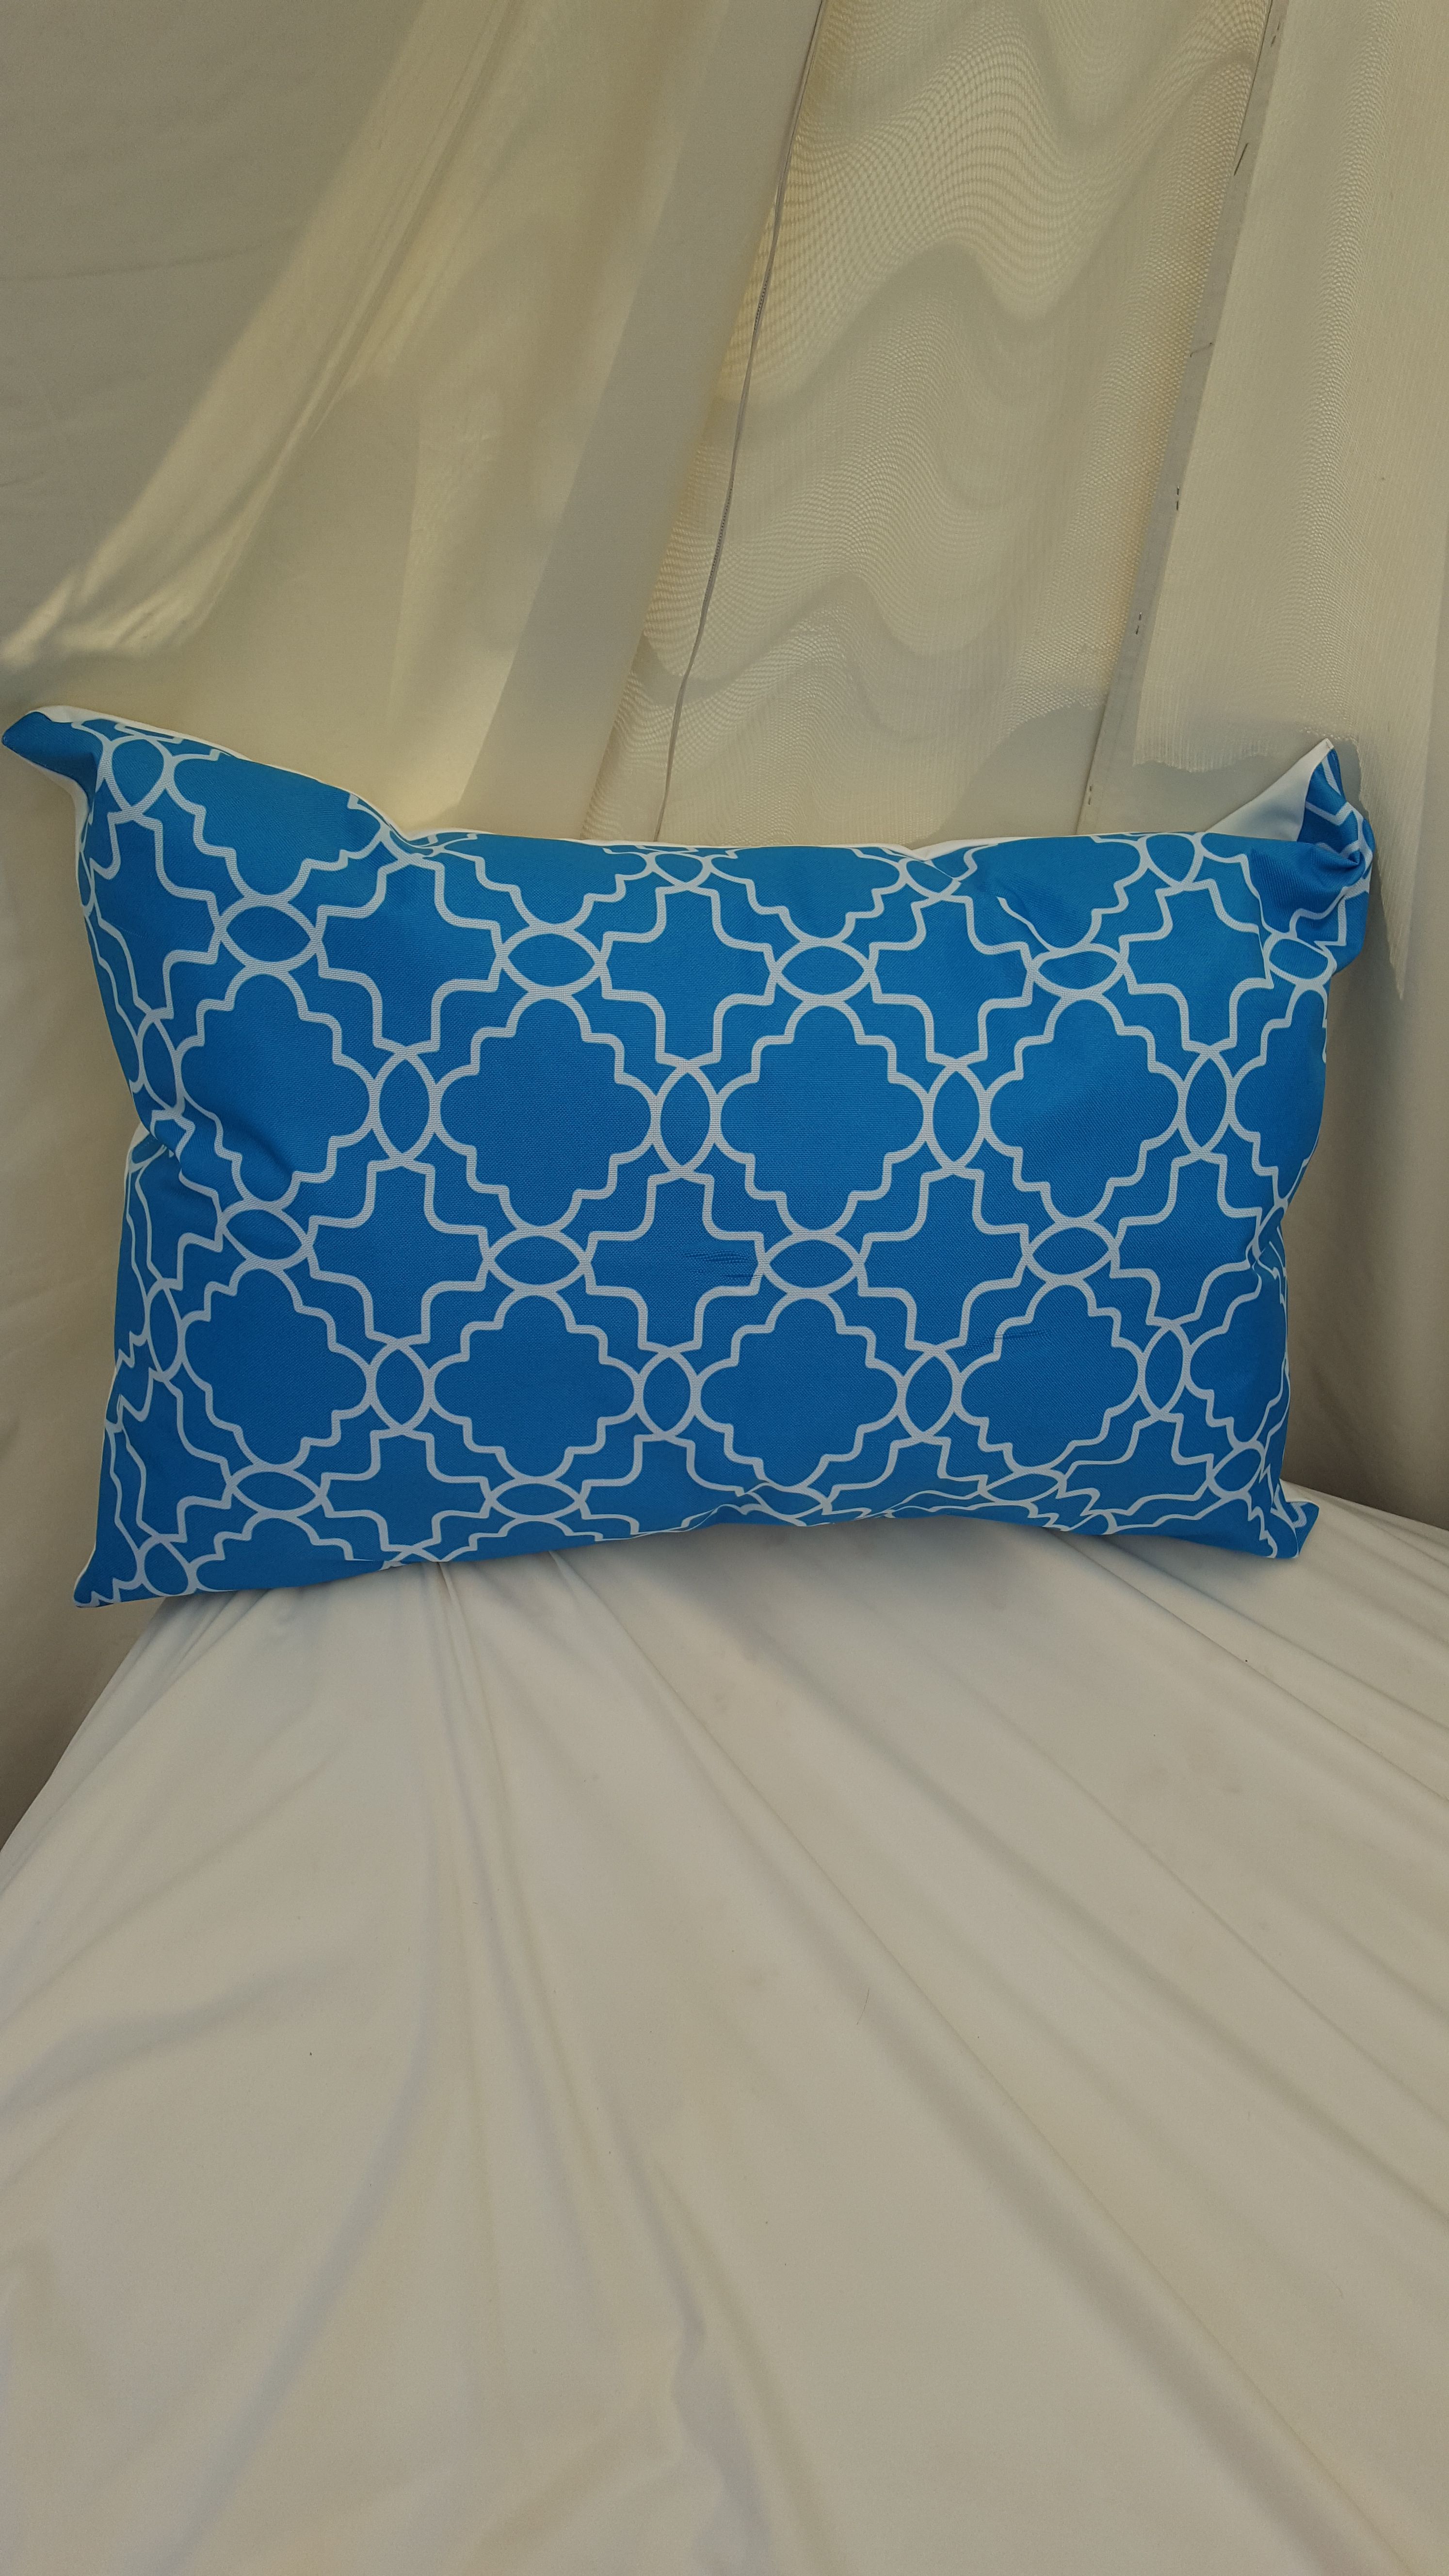 Brand new blue and white accent pillows!